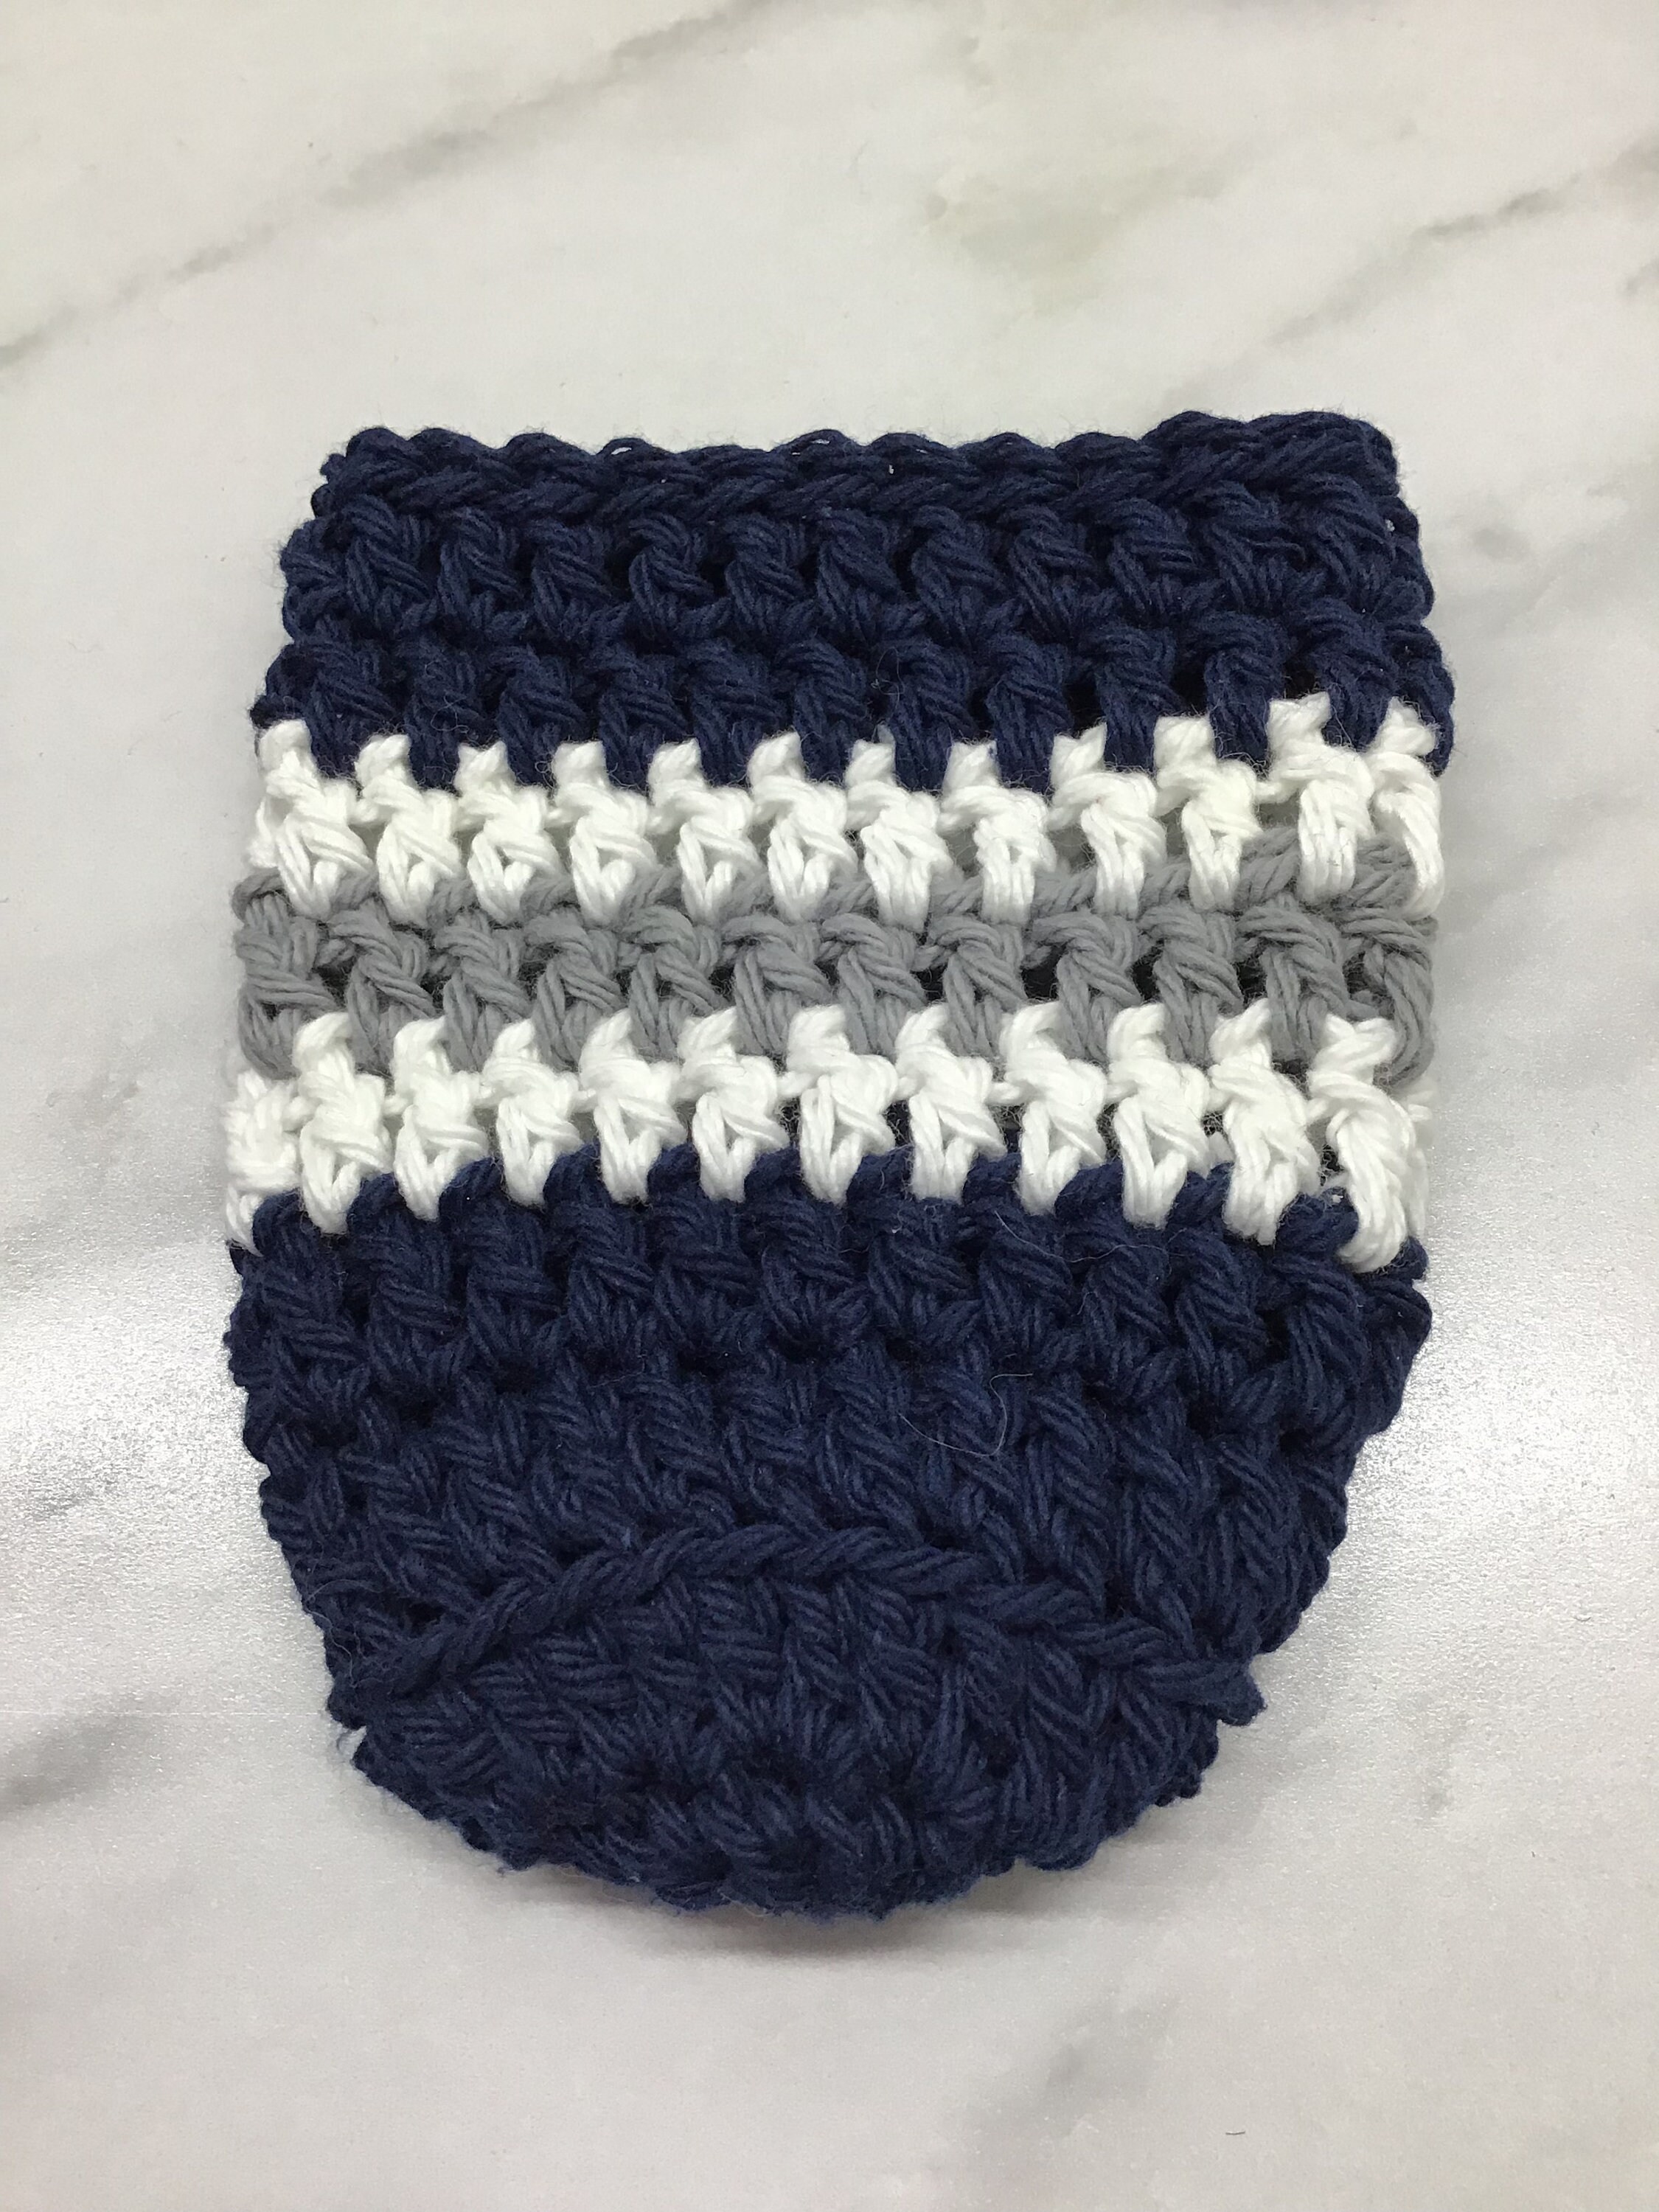 Crocheted Dallas Cowboys koozie, my wife's friend made. Awesome